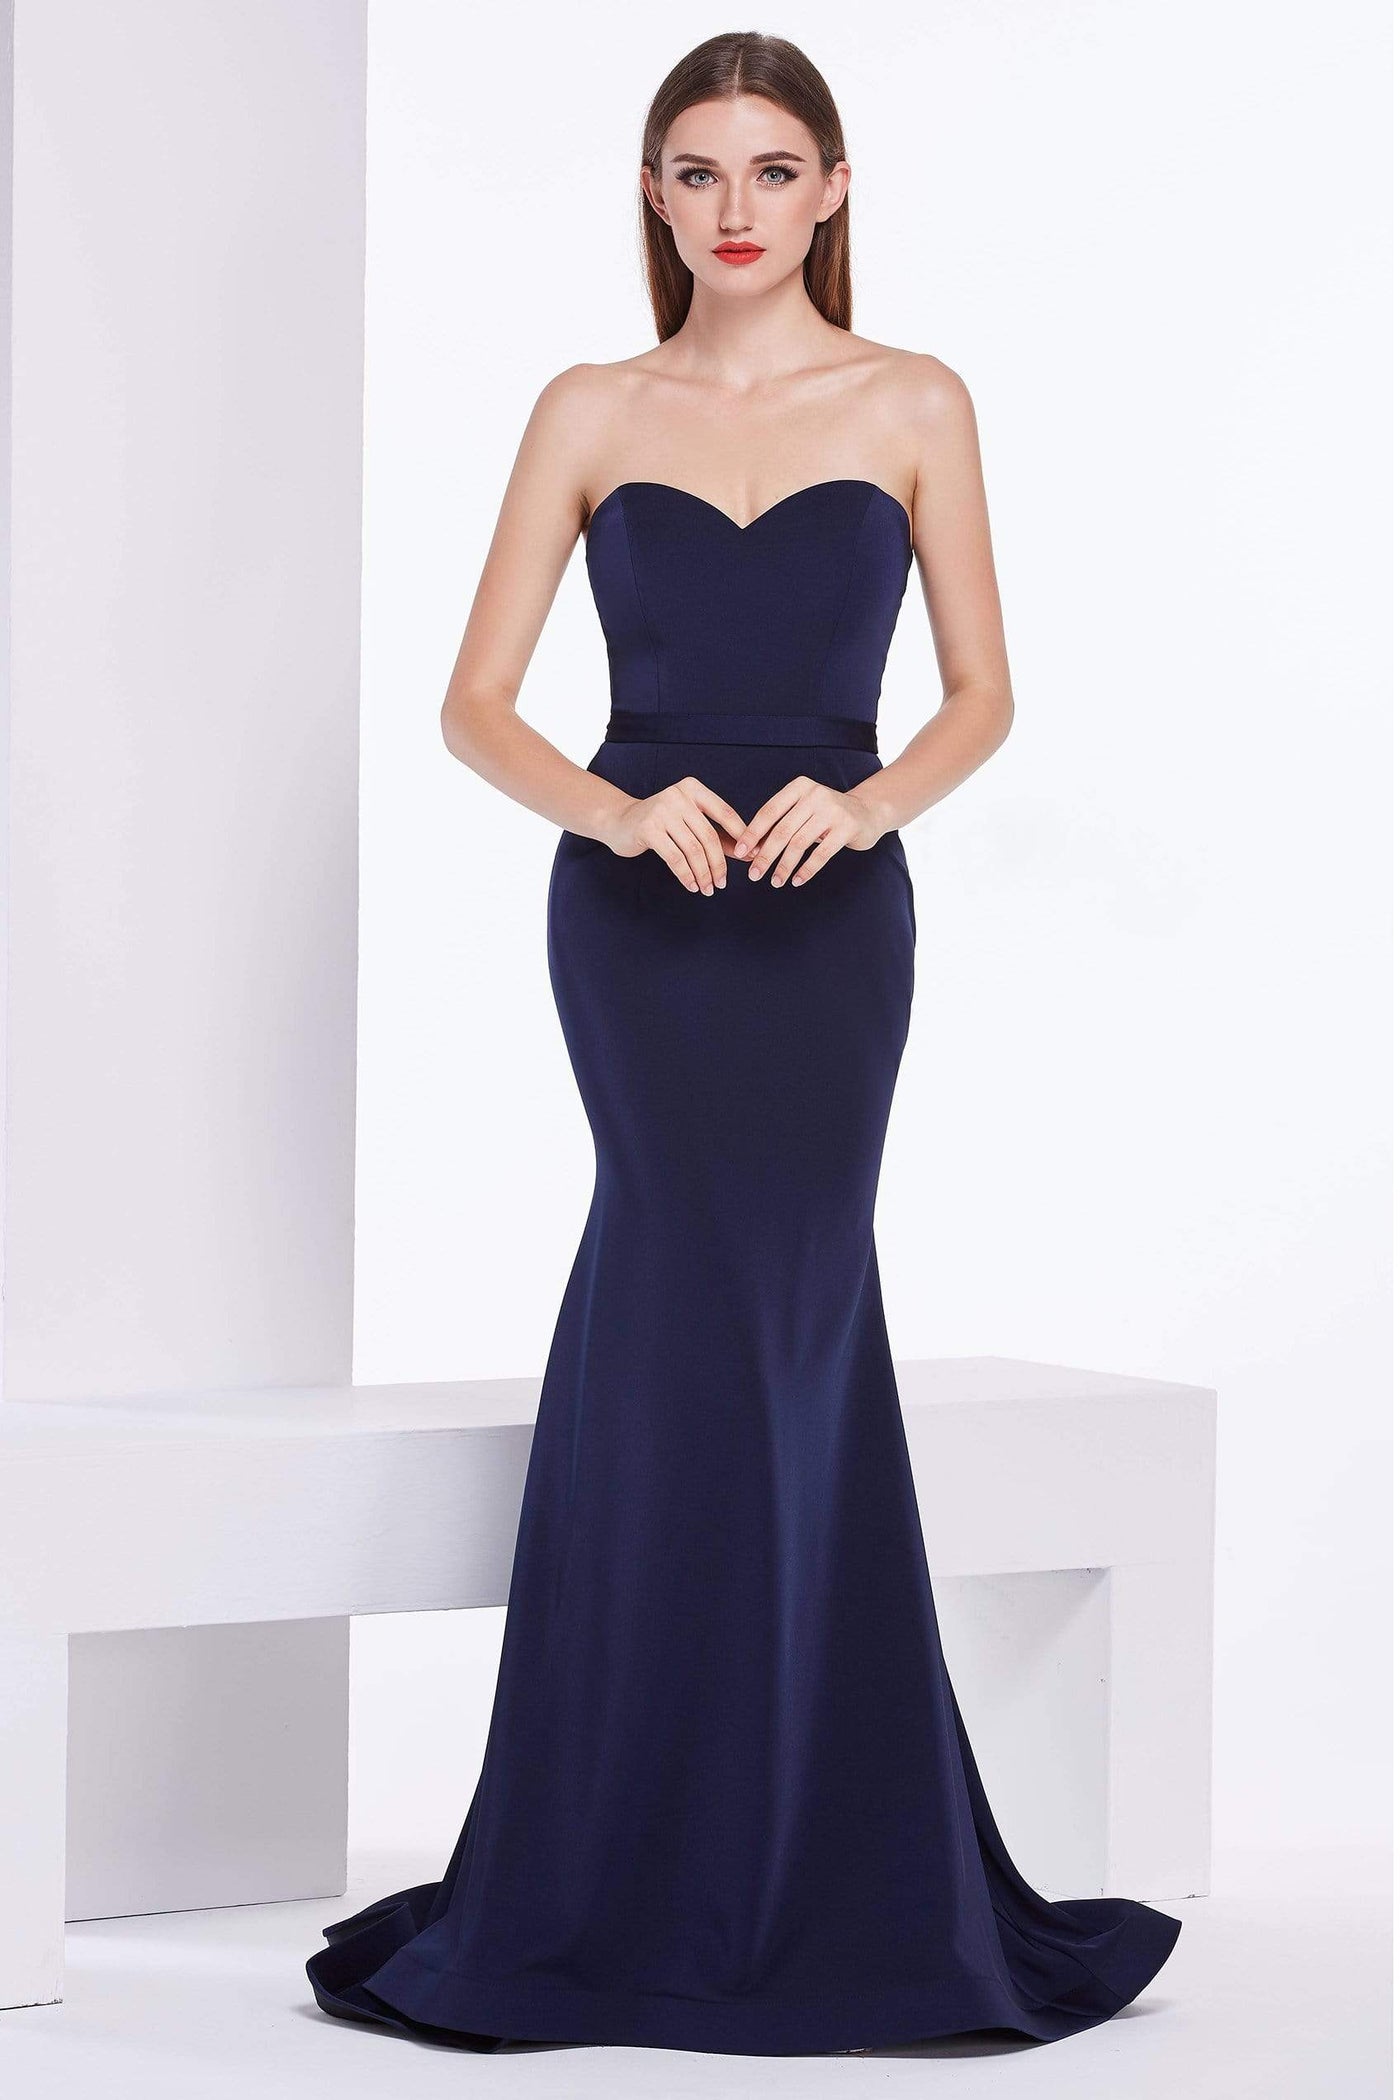 Jadore - J14047 Strapless Sweetheart Satin Crepe Trumpet Dress Special Occasion Dress 2 / Navy